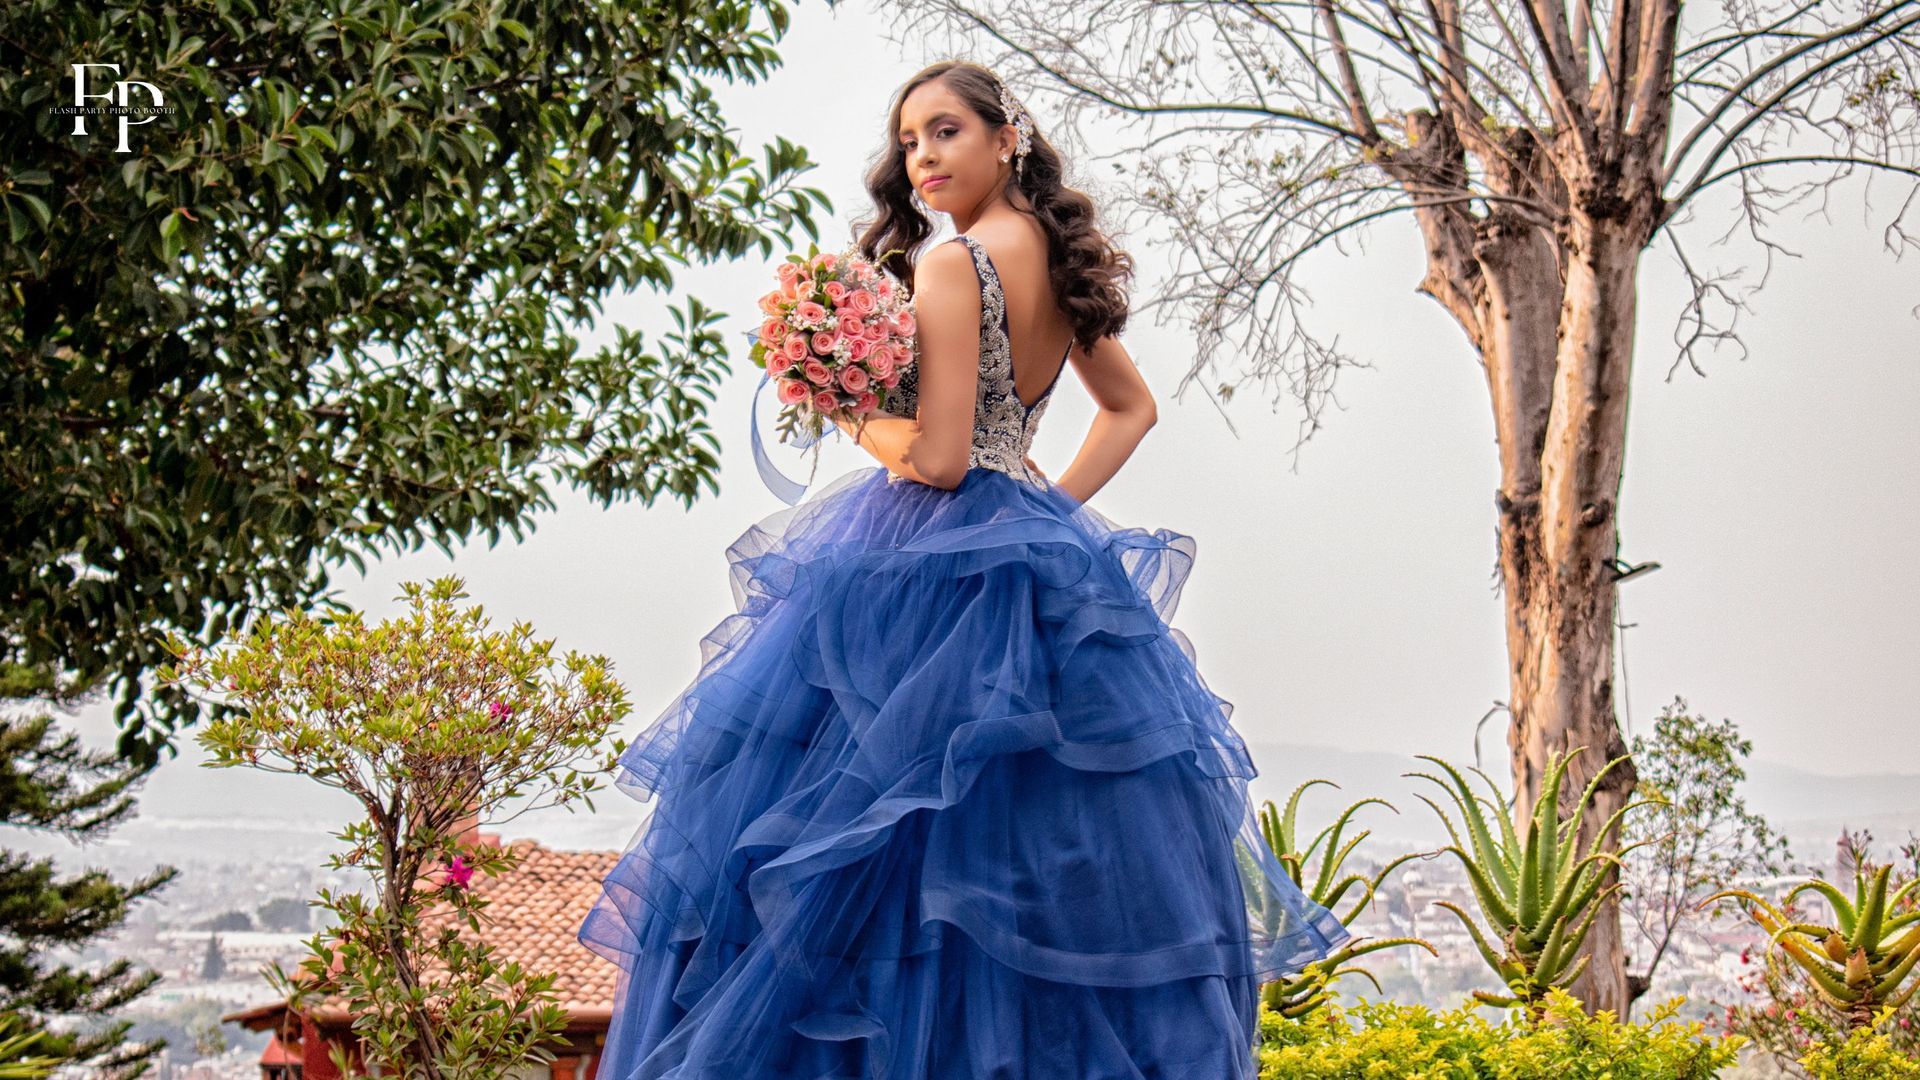 A celebrant in a stunning blue gown holding a bouquet and striking a pose for a photo shoot for her quinceanera in Midland